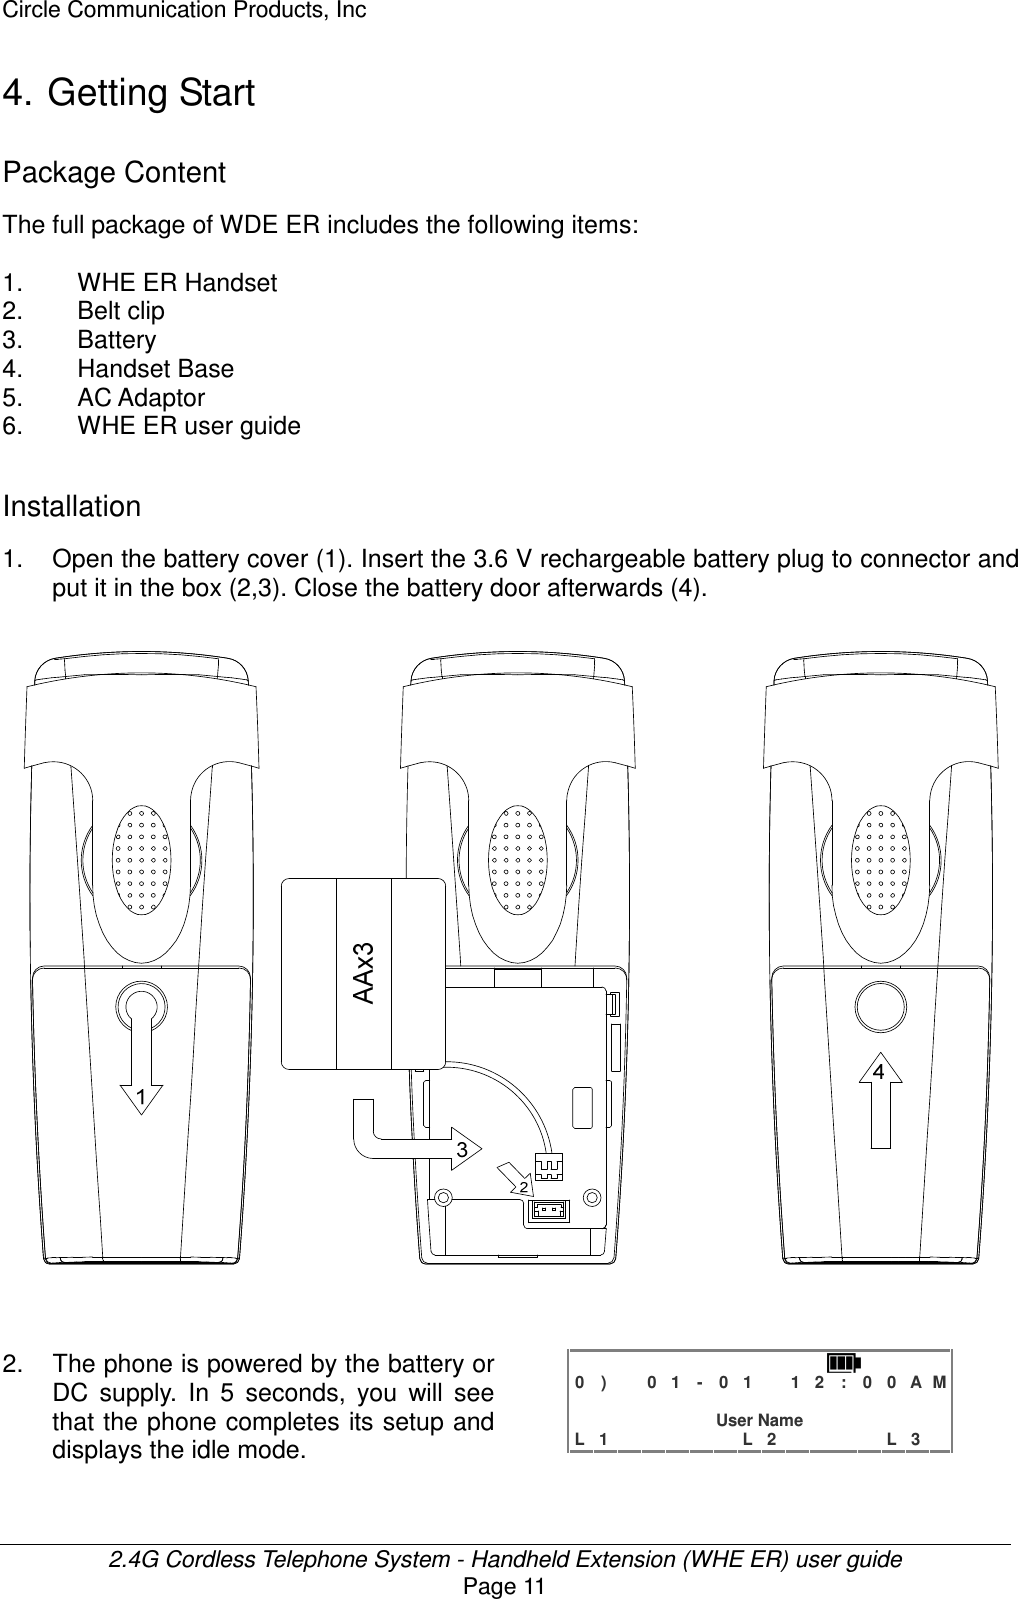 Circle Communication Products, Inc  2.4G Cordless Telephone System - Handheld Extension (WHE ER) user guide Page 11 4. Getting Start Package Content The full package of WDE ER includes the following items:    1.  WHE ER Handset 2.  Belt clip 3.  Battery 4.  Handset Base 5.  AC Adaptor 6.  WHE ER user guide  Installation 1. Open the battery cover (1). Insert the 3.6 V rechargeable battery plug to connector and put it in the box (2,3). Close the battery door afterwards (4).                           2.  The phone is powered by the battery or DC  supply.  In  5  seconds,  you  will  see that the phone completes its setup and displays the idle mode.   0 )   0 1 - 0 1  1 2 : 0 0 A M                 User Name L 1      L 2     L 3   